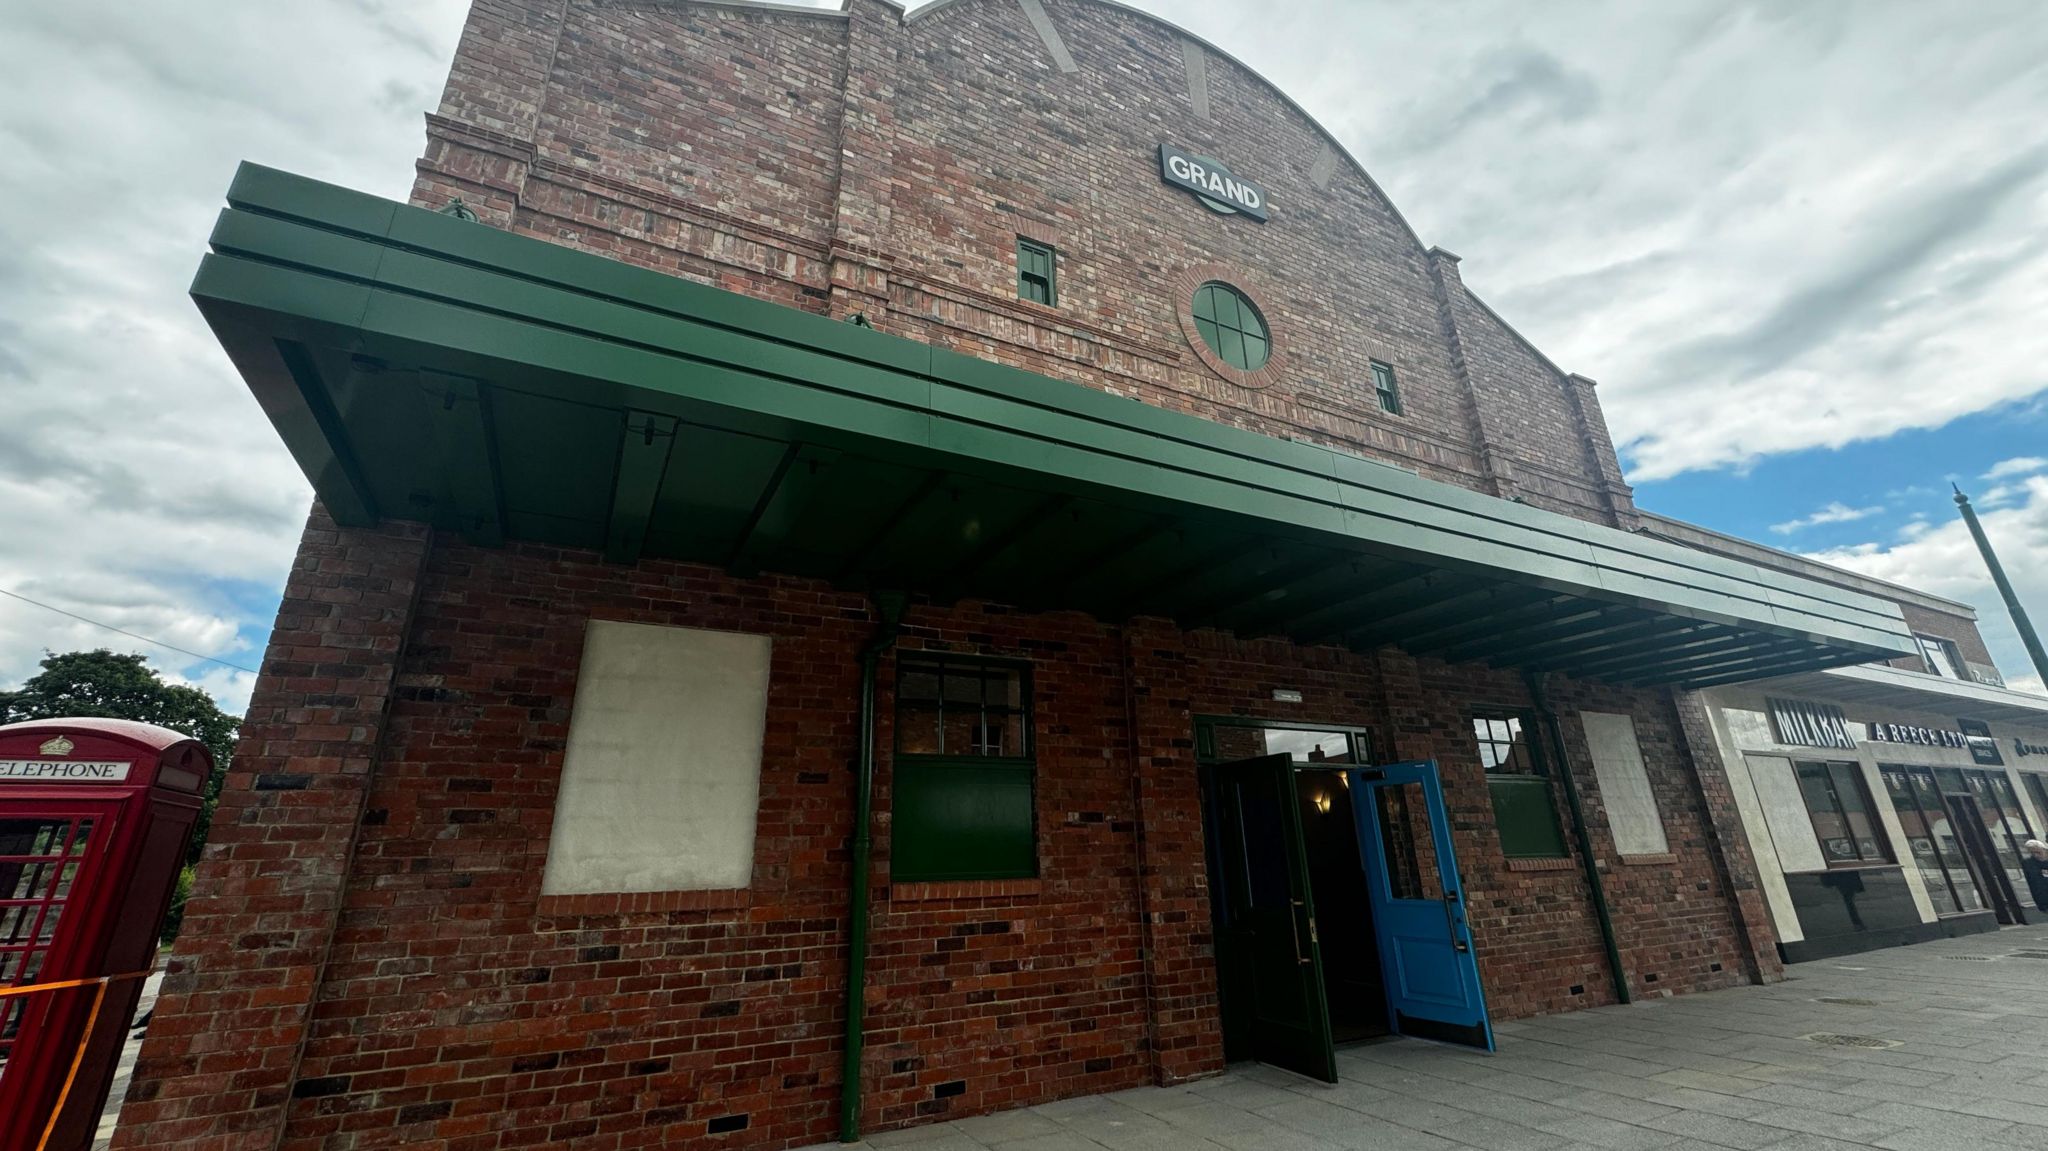 Ryhope's Grand Cinema, rebuilt at Beamish, is a brown-bricked building with a green canopy above blue doors.